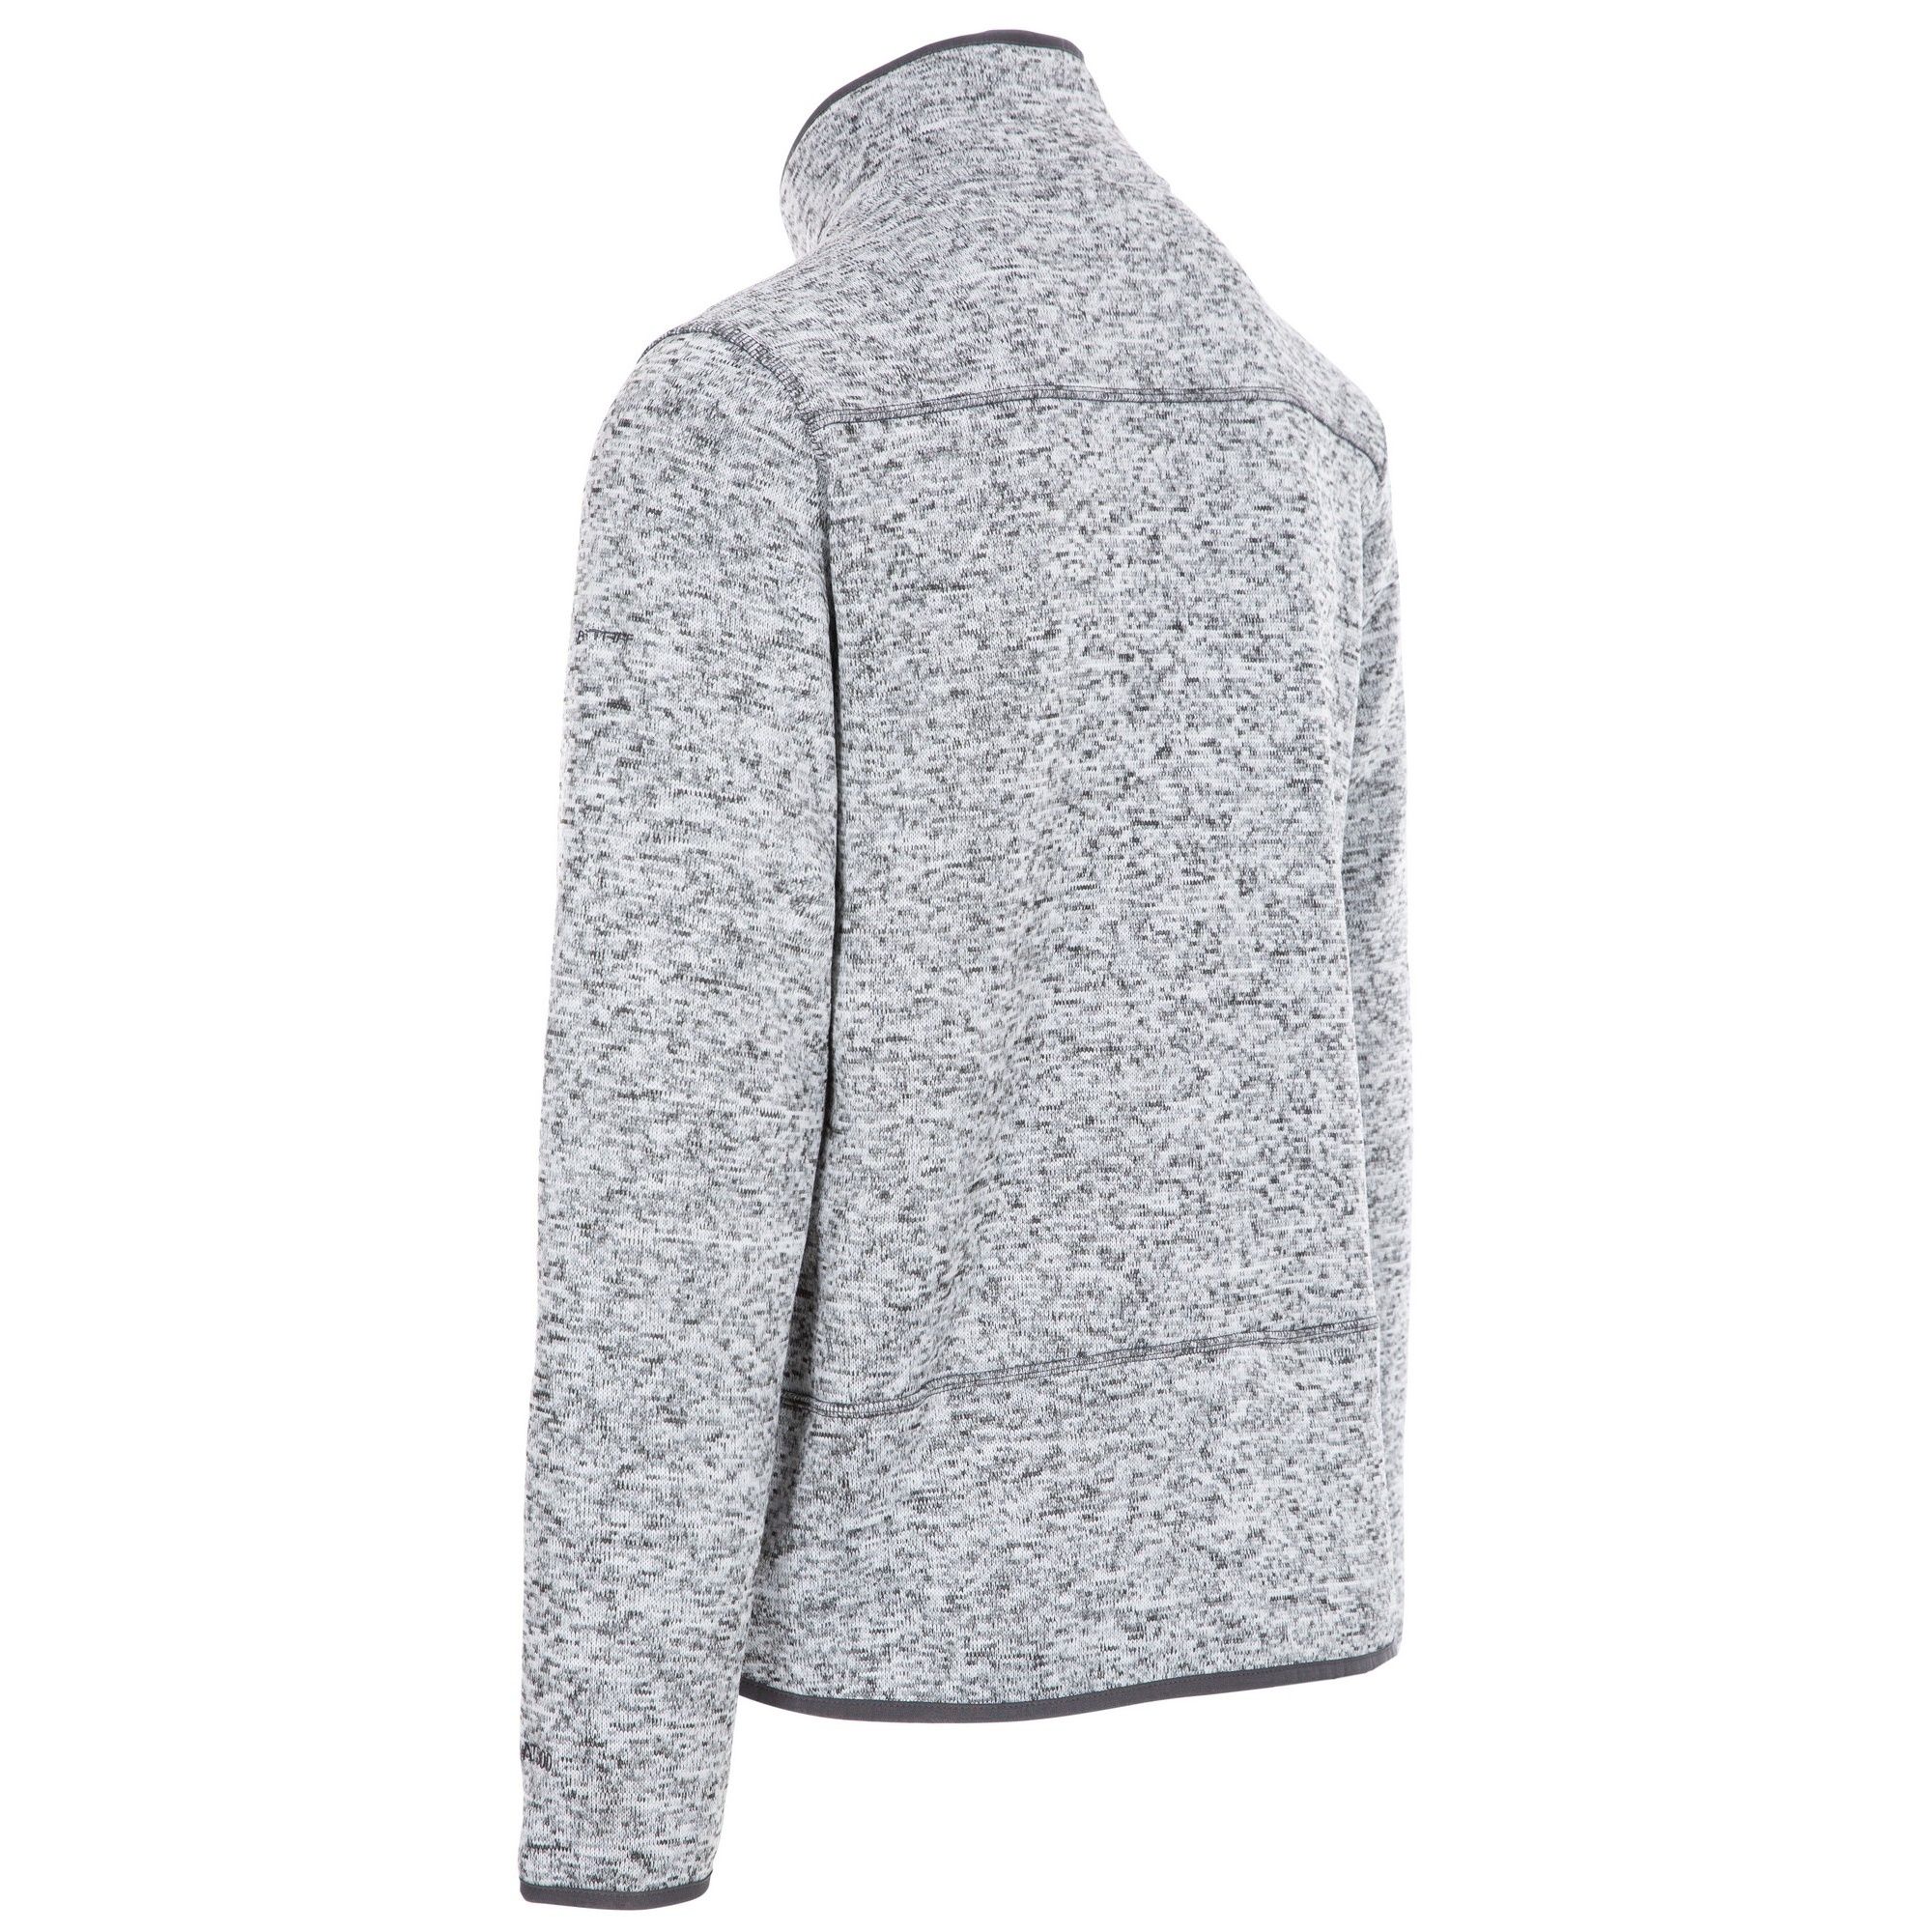 Knitted marl fleece. Brushed back. Chest pocket with printed surround detail. Coverstitch detail. 3 zip pockets. Stretch binding at cuffs and hem. 100% polyester.